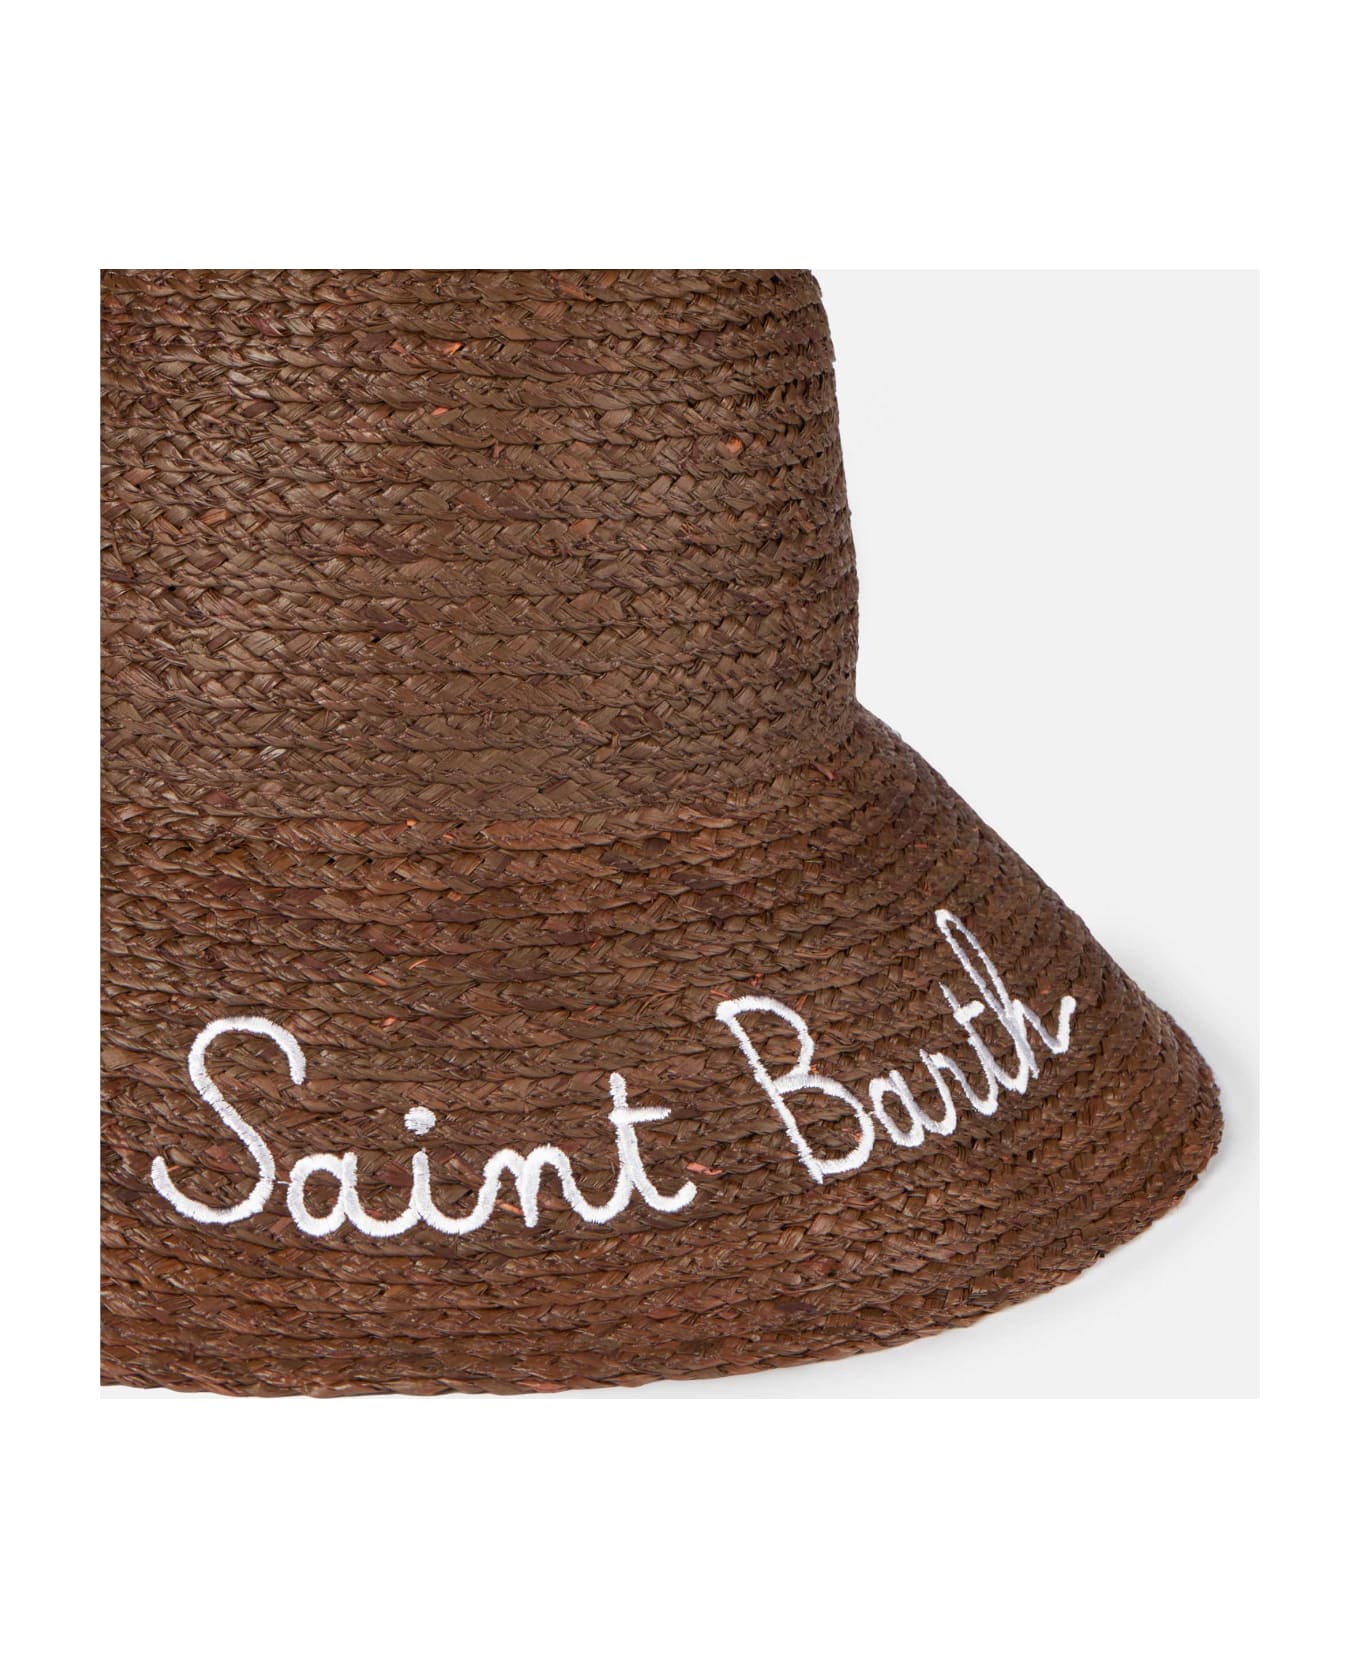 MC2 Saint Barth Woman Straw Light Brown Bucket With Front Embroidery - BROWN 帽子